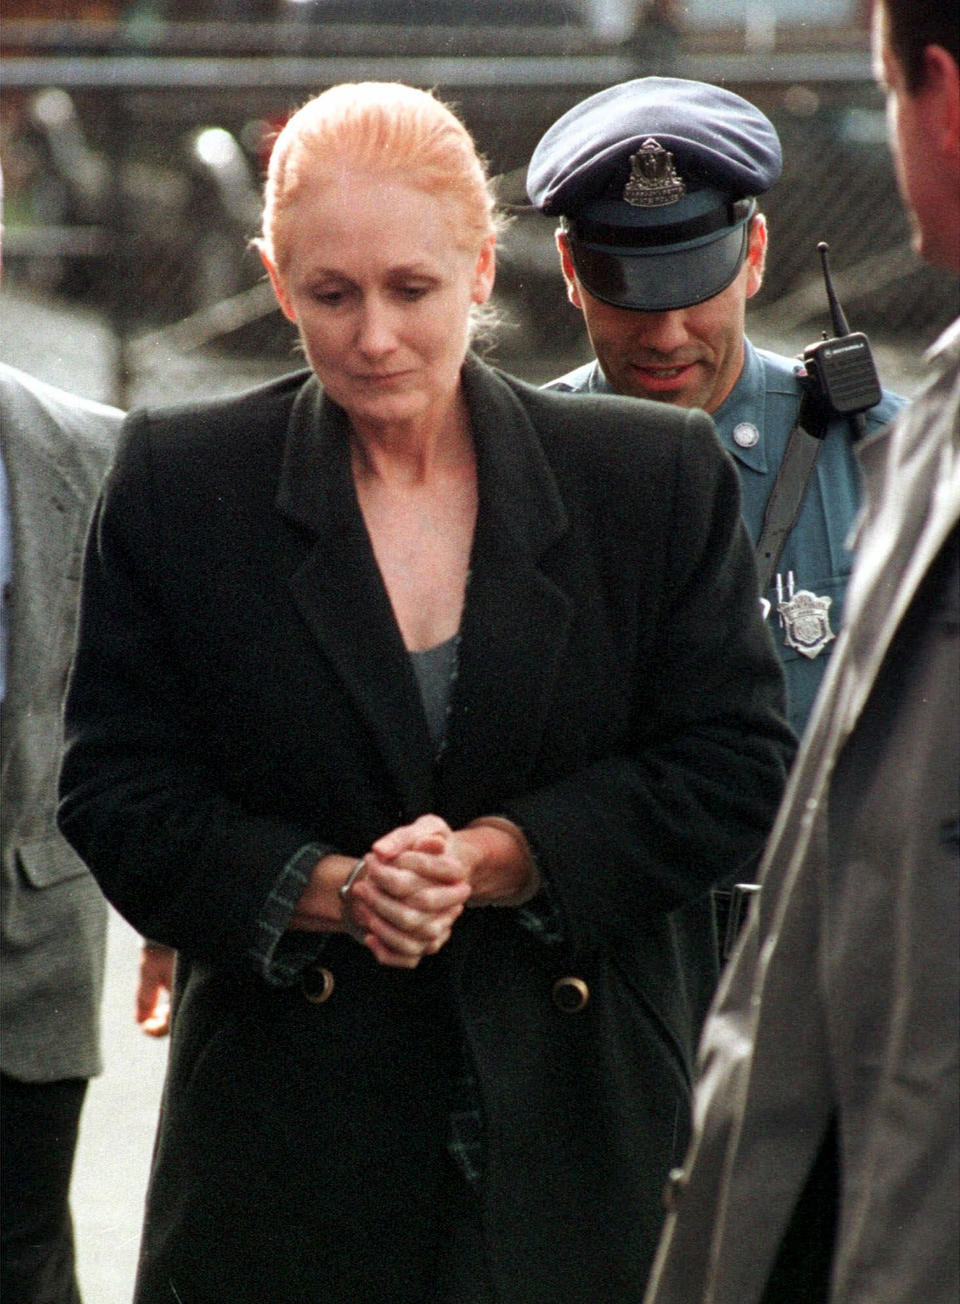 FILE - In this Nov. 8, 1999 file photo, Margaret Rudin is escorted by police into Framingham District Court in Framingham, Mass., before her arraignment on charges in connection with the shooting death of her husband. On Friday, Jan. 10, 2020, Rudin was released from prison, more than 25 years after her millionaire husband's burned body was found outside Las Vegas and 20 years after a tip generated by a "most wanted" TV show led to her arrest while living in Massachusetts with a retired firefighter she met in Mexico. (AP Photo/Michael Dwyer, File)